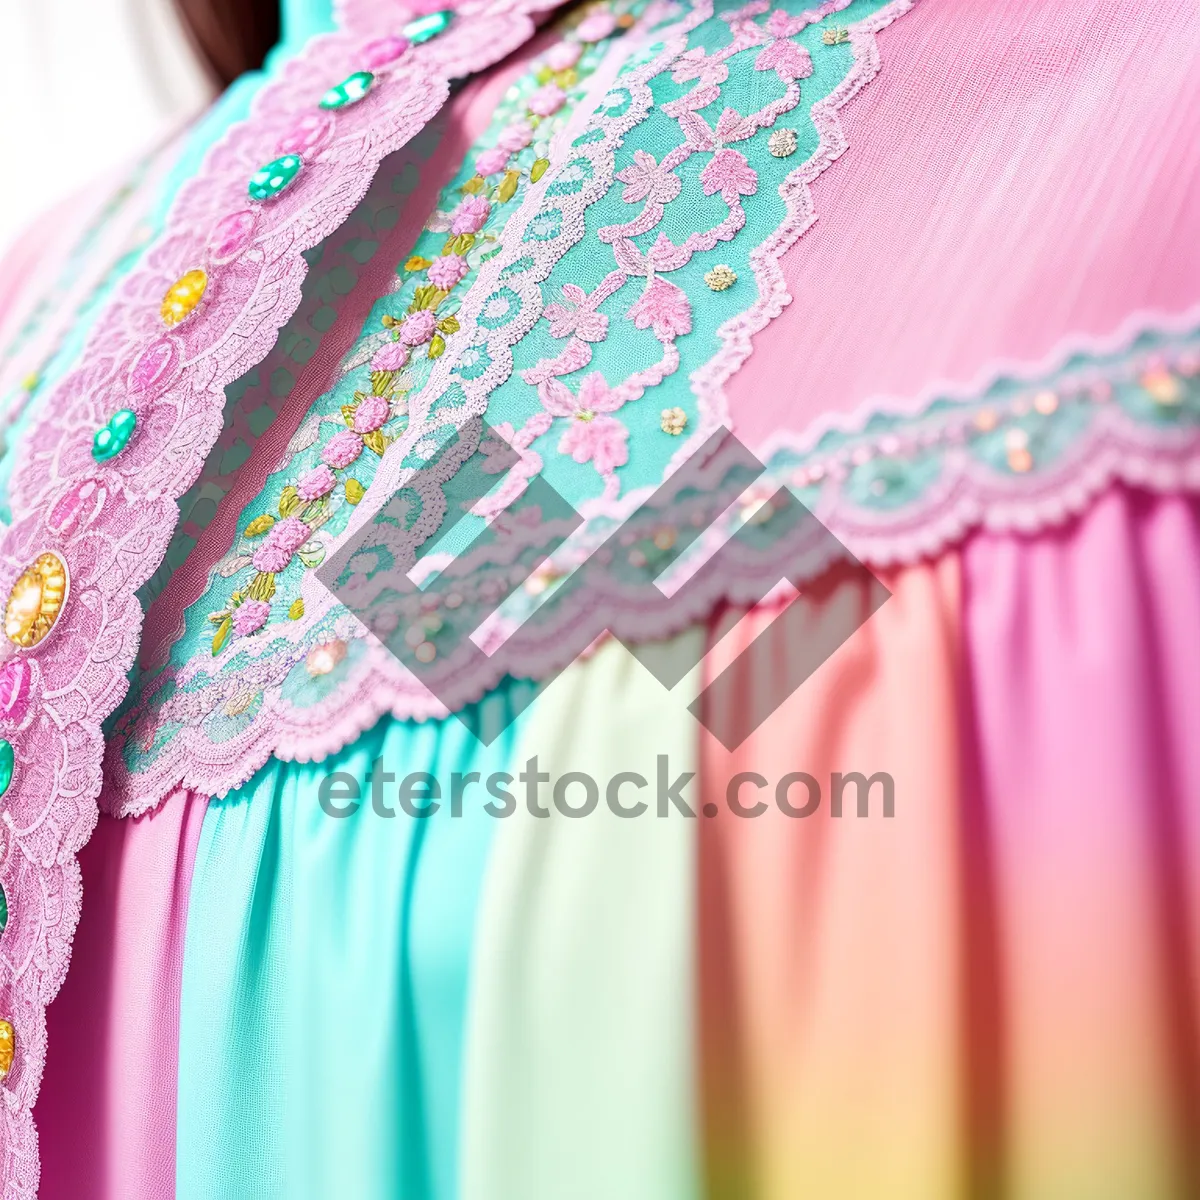 Picture of Pretty Embroidered Fashion Dress - Happy People